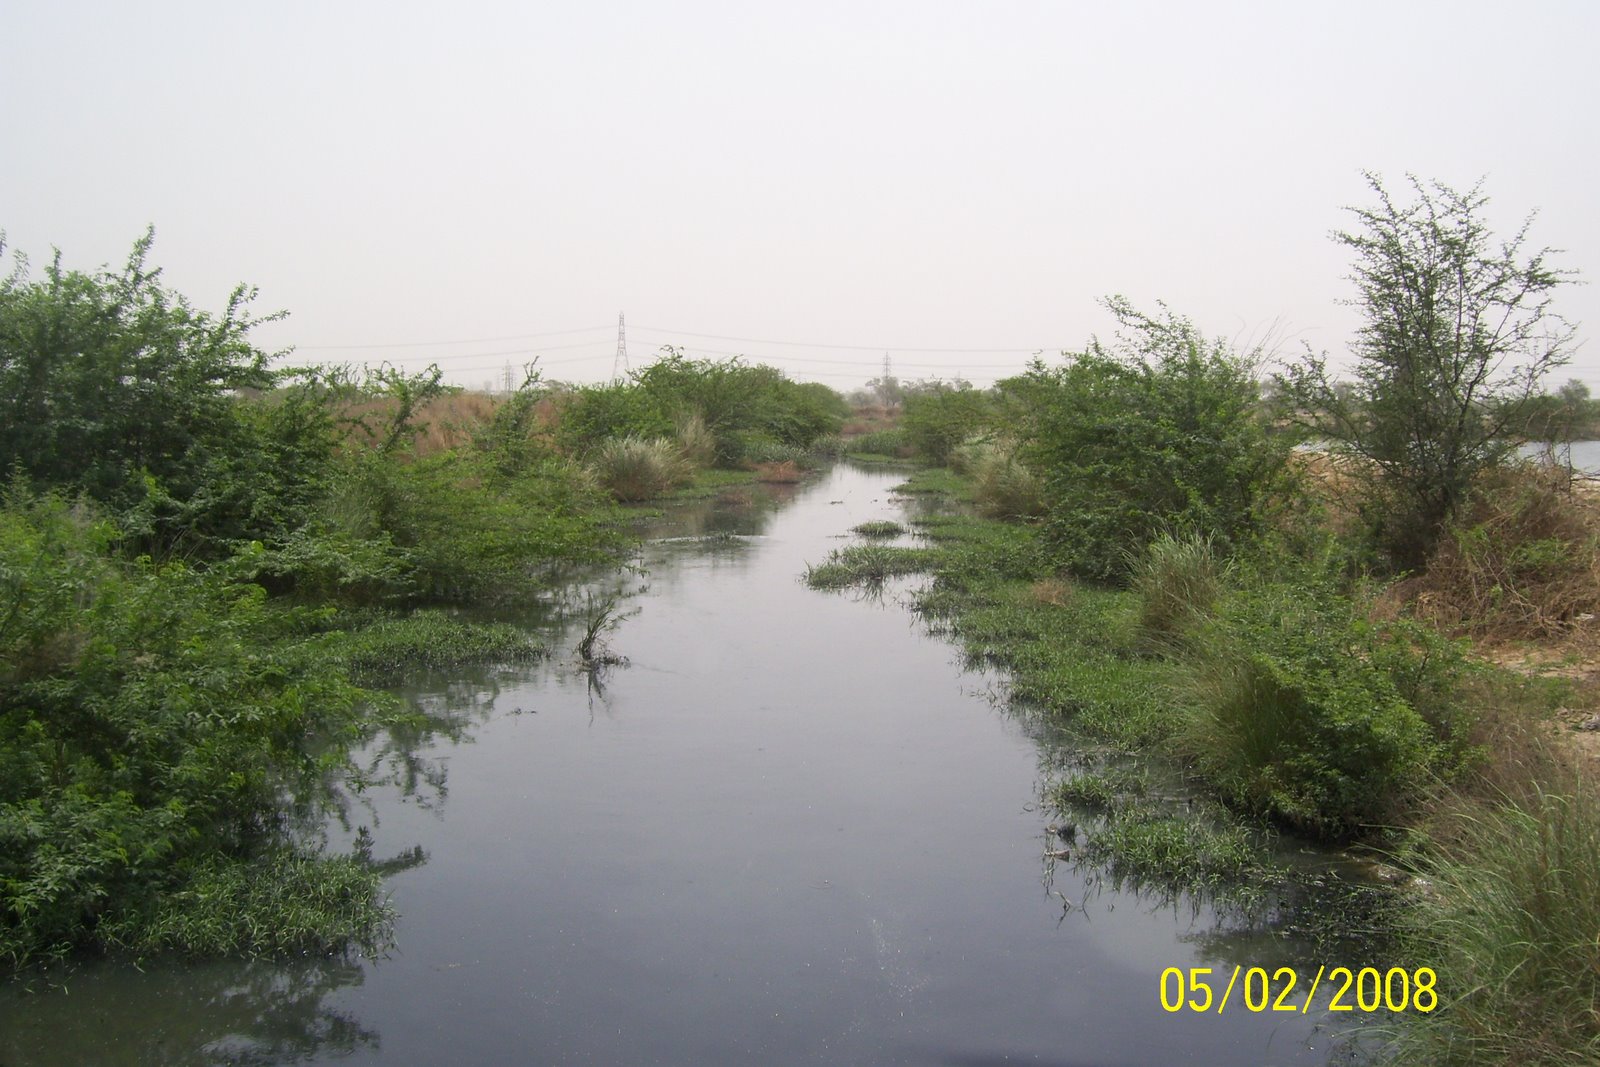 [one+of+the+sewage+drains+from+gurgaon+city.JPG]